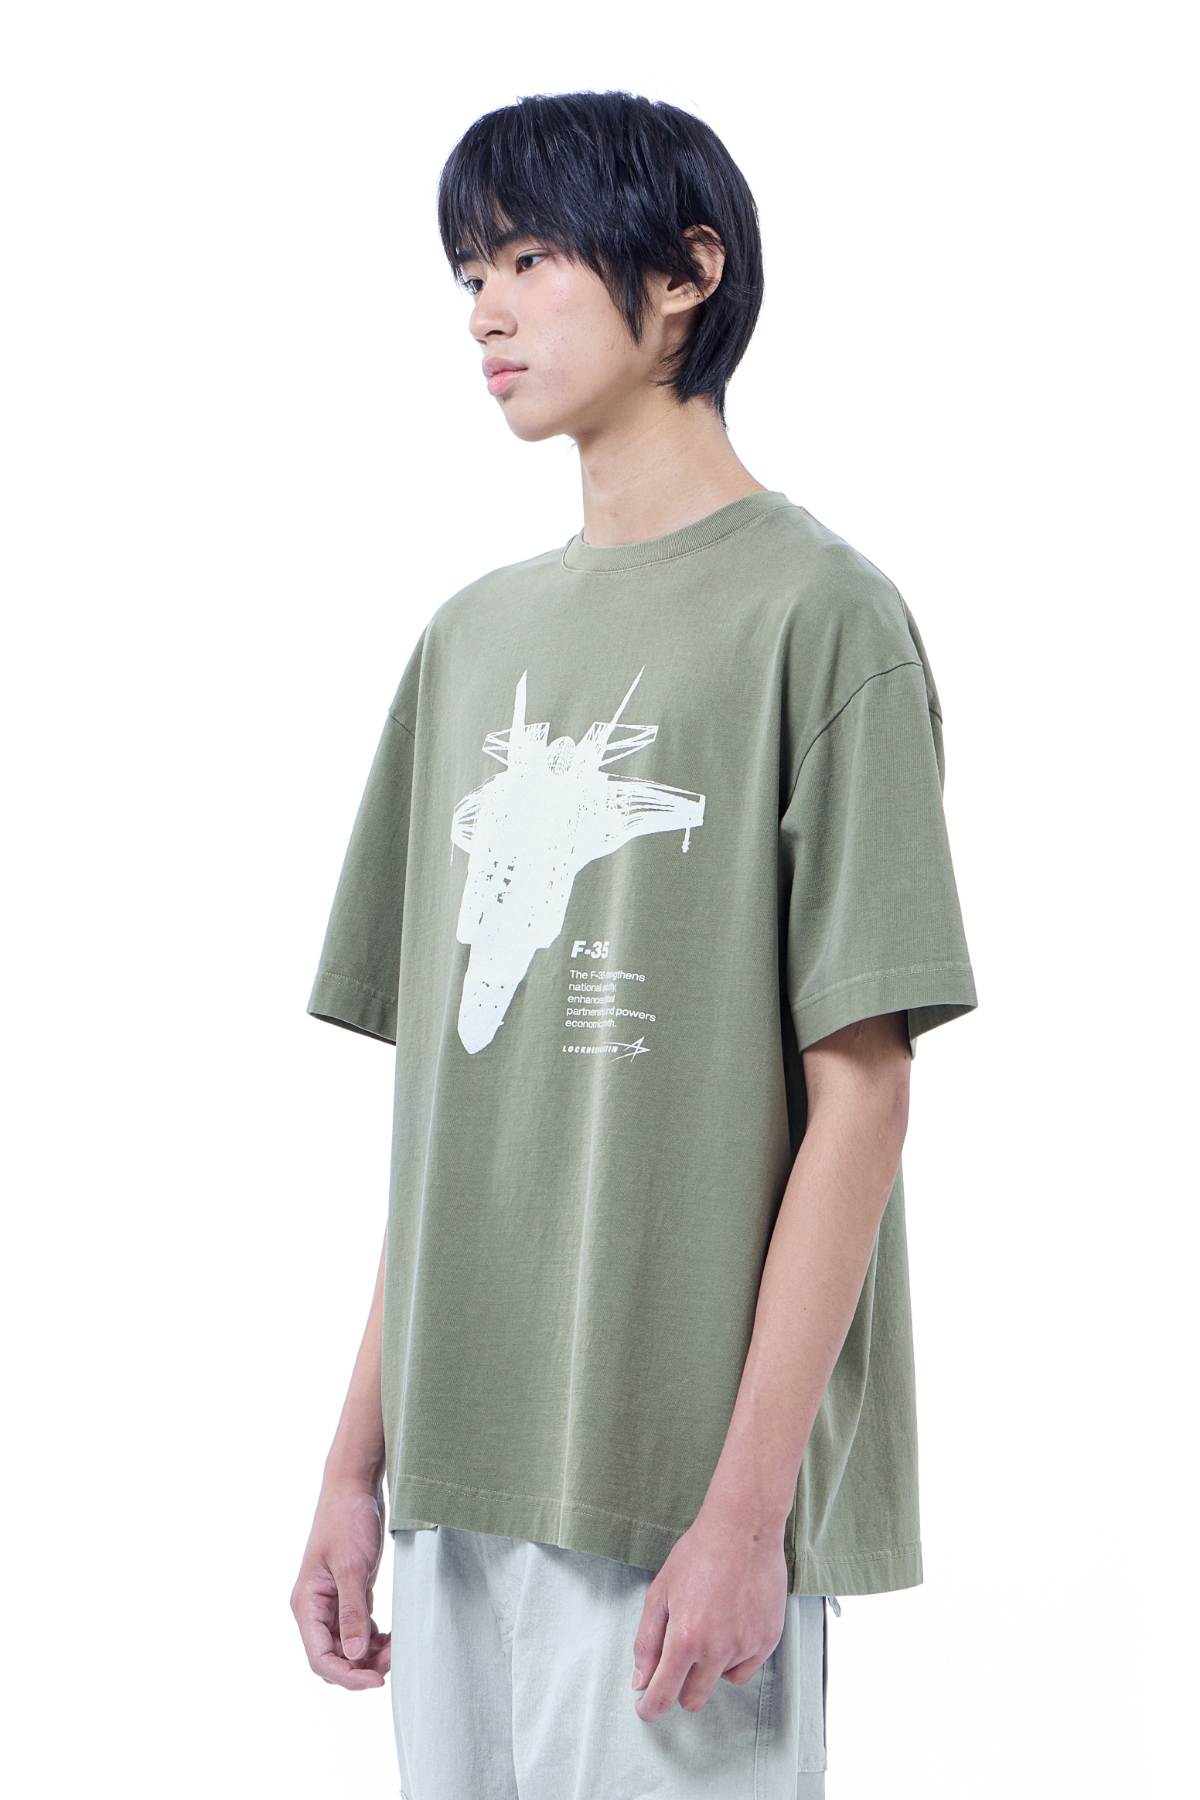 LM F-35 GRAPHIC GARMENT DYED OVER T-SHIRT (KHAKI)